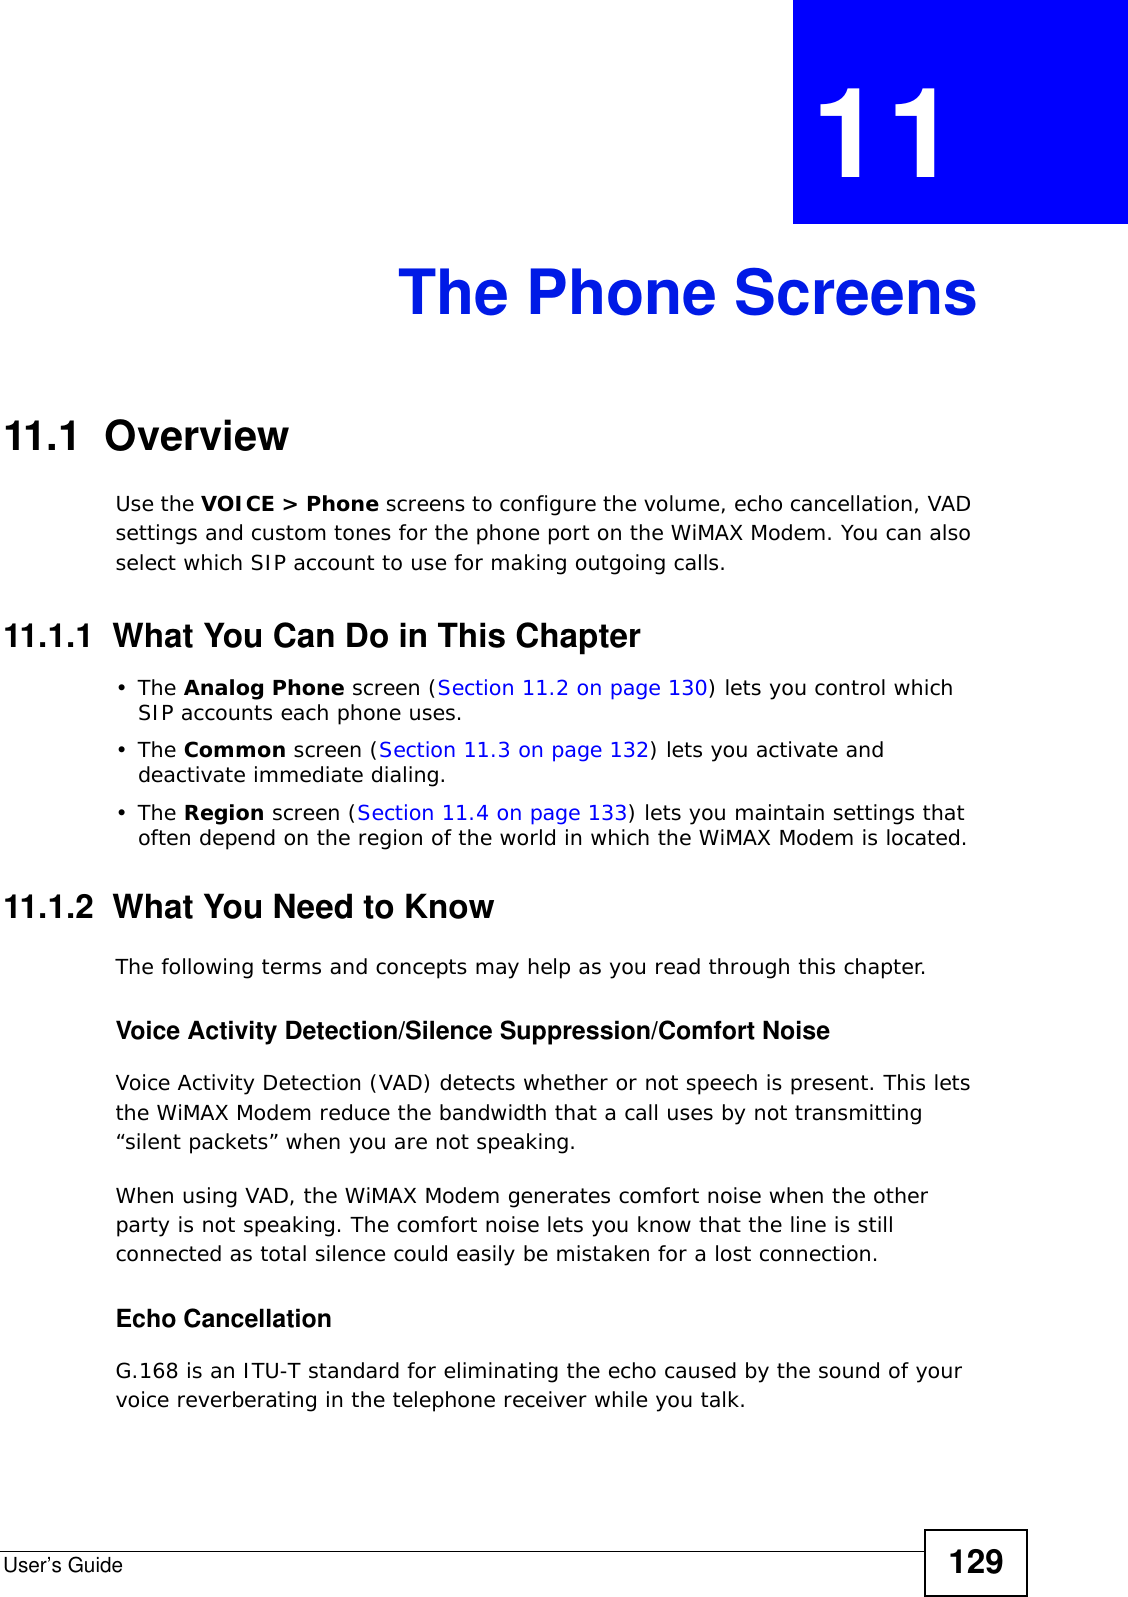 User’s Guide 129CHAPTER  11 The Phone Screens11.1  OverviewUse the VOICE &gt; Phone screens to configure the volume, echo cancellation, VAD settings and custom tones for the phone port on the WiMAX Modem. You can also select which SIP account to use for making outgoing calls.11.1.1  What You Can Do in This Chapter•The Analog Phone screen (Section 11.2 on page 130) lets you control which SIP accounts each phone uses.•The Common screen (Section 11.3 on page 132) lets you activate and deactivate immediate dialing.•The Region screen (Section 11.4 on page 133) lets you maintain settings that often depend on the region of the world in which the WiMAX Modem is located.11.1.2  What You Need to KnowThe following terms and concepts may help as you read through this chapter.Voice Activity Detection/Silence Suppression/Comfort NoiseVoice Activity Detection (VAD) detects whether or not speech is present. This lets the WiMAX Modem reduce the bandwidth that a call uses by not transmitting “silent packets” when you are not speaking.When using VAD, the WiMAX Modem generates comfort noise when the other party is not speaking. The comfort noise lets you know that the line is still connected as total silence could easily be mistaken for a lost connection.Echo Cancellation G.168 is an ITU-T standard for eliminating the echo caused by the sound of your voice reverberating in the telephone receiver while you talk.